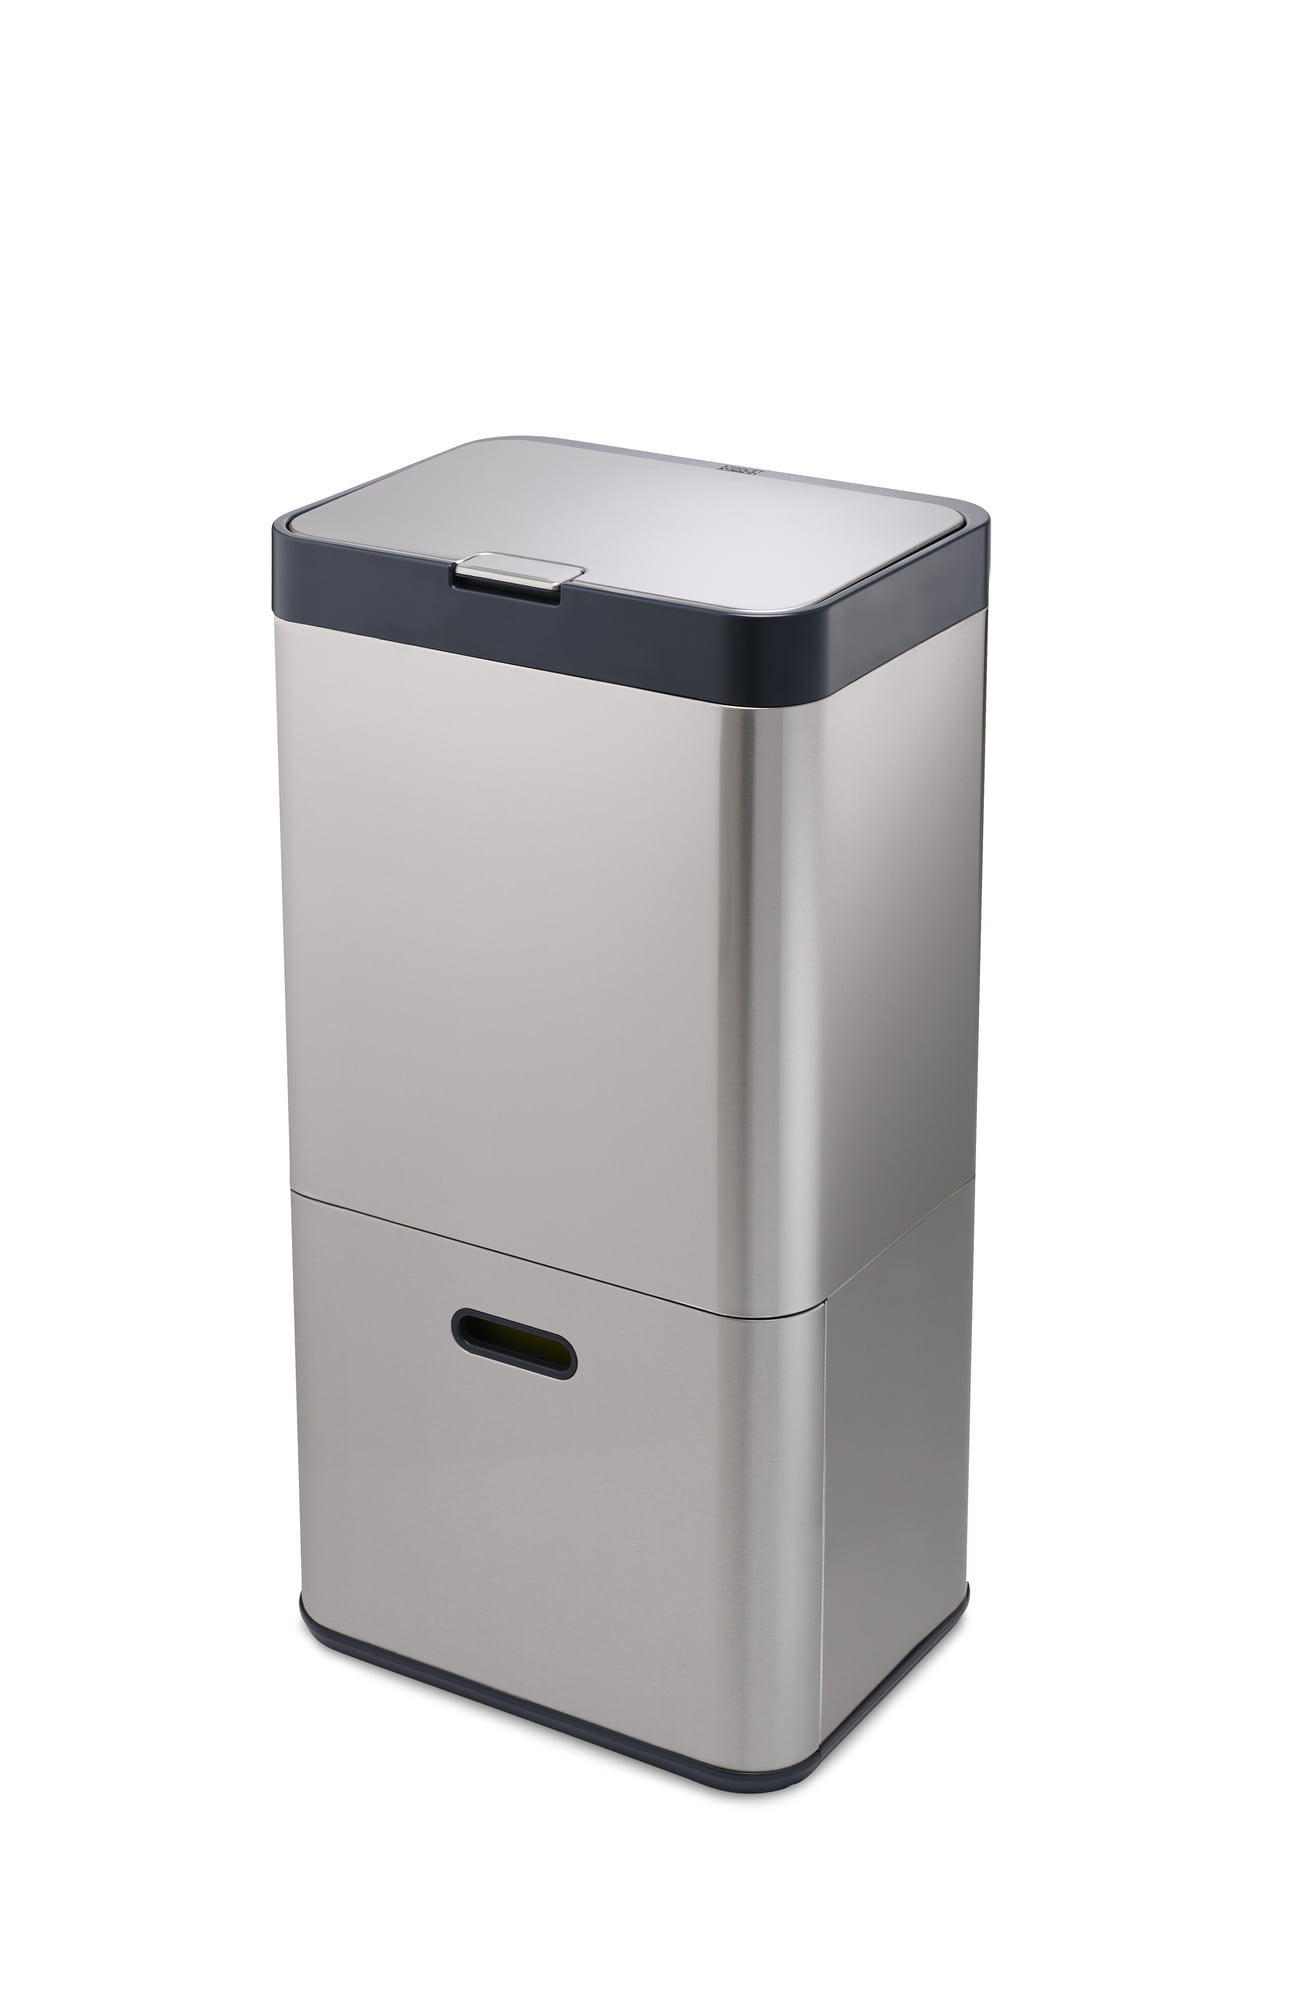 Joseph 60 Waste Separation and Recycling Unit, 60 L - Stainless Steel - Walmart.com